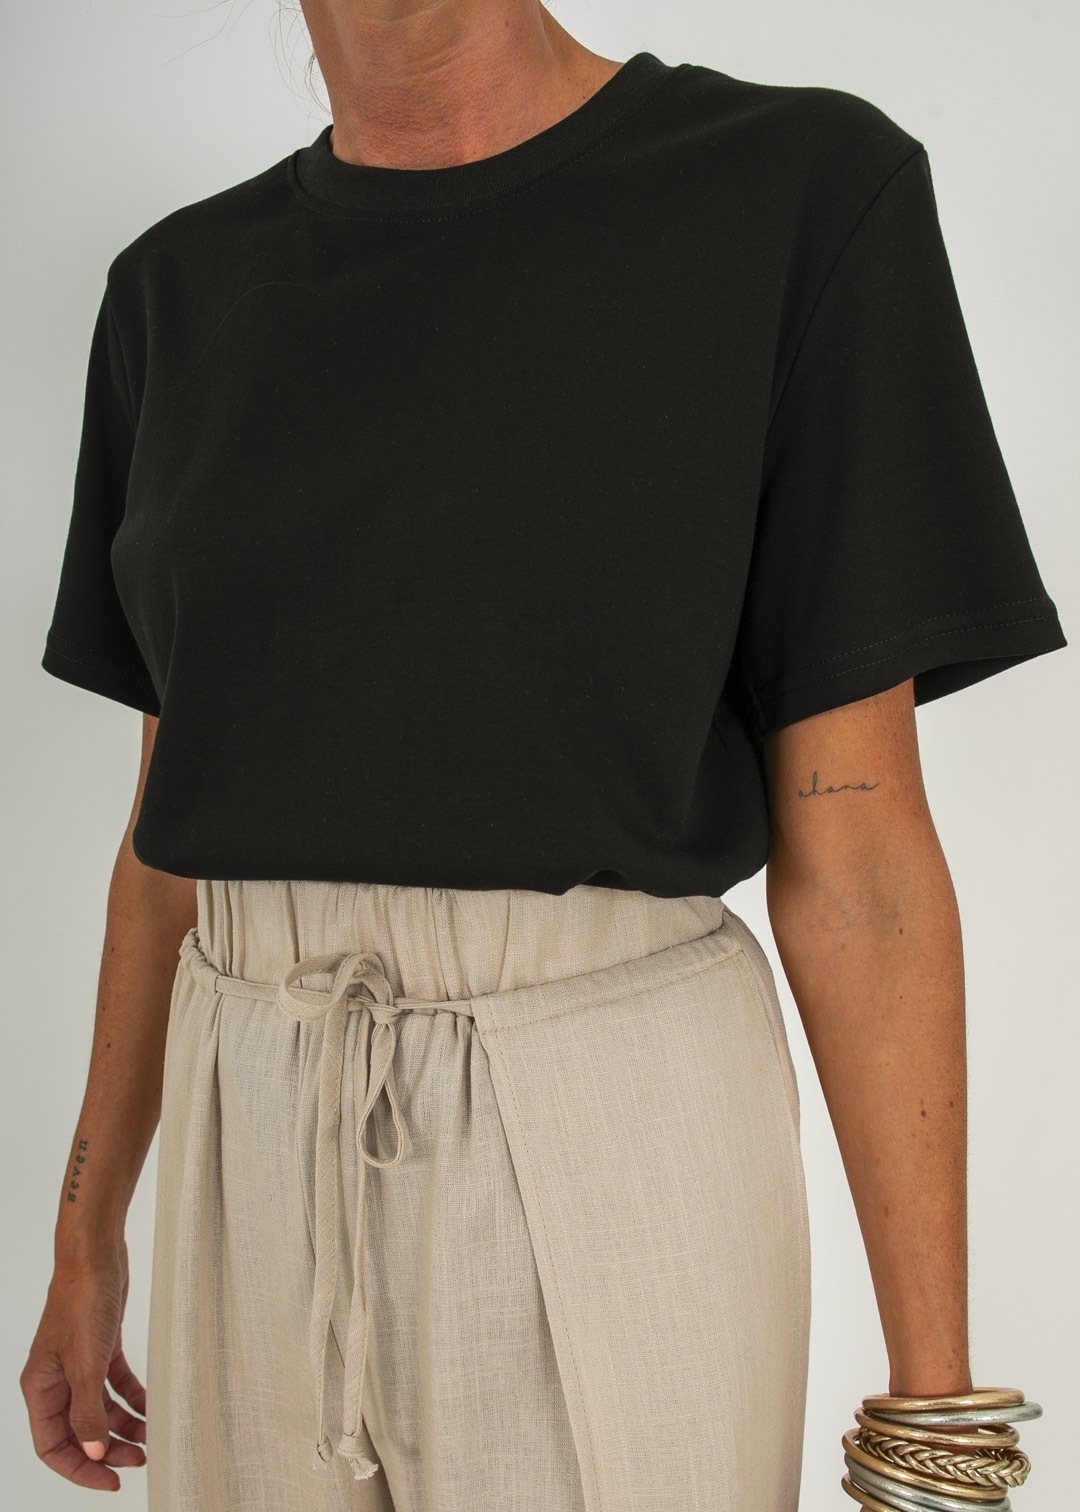 LINEN TROUSERS PAREO STYLE SAND